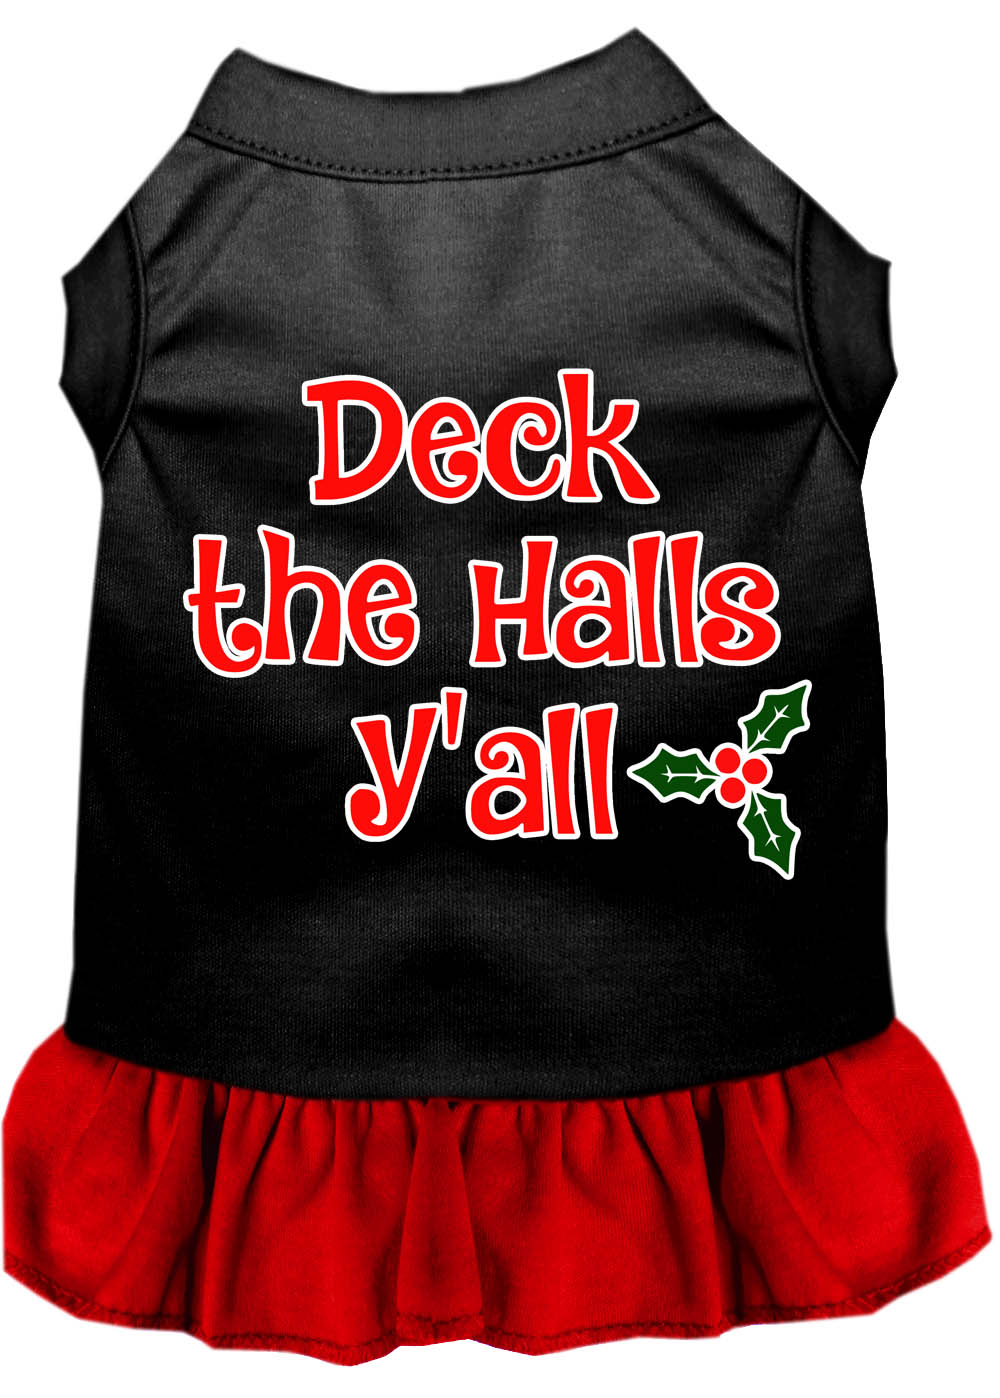 Deck the Halls Y'all Screen Print Dog Dress Black with Red Lg